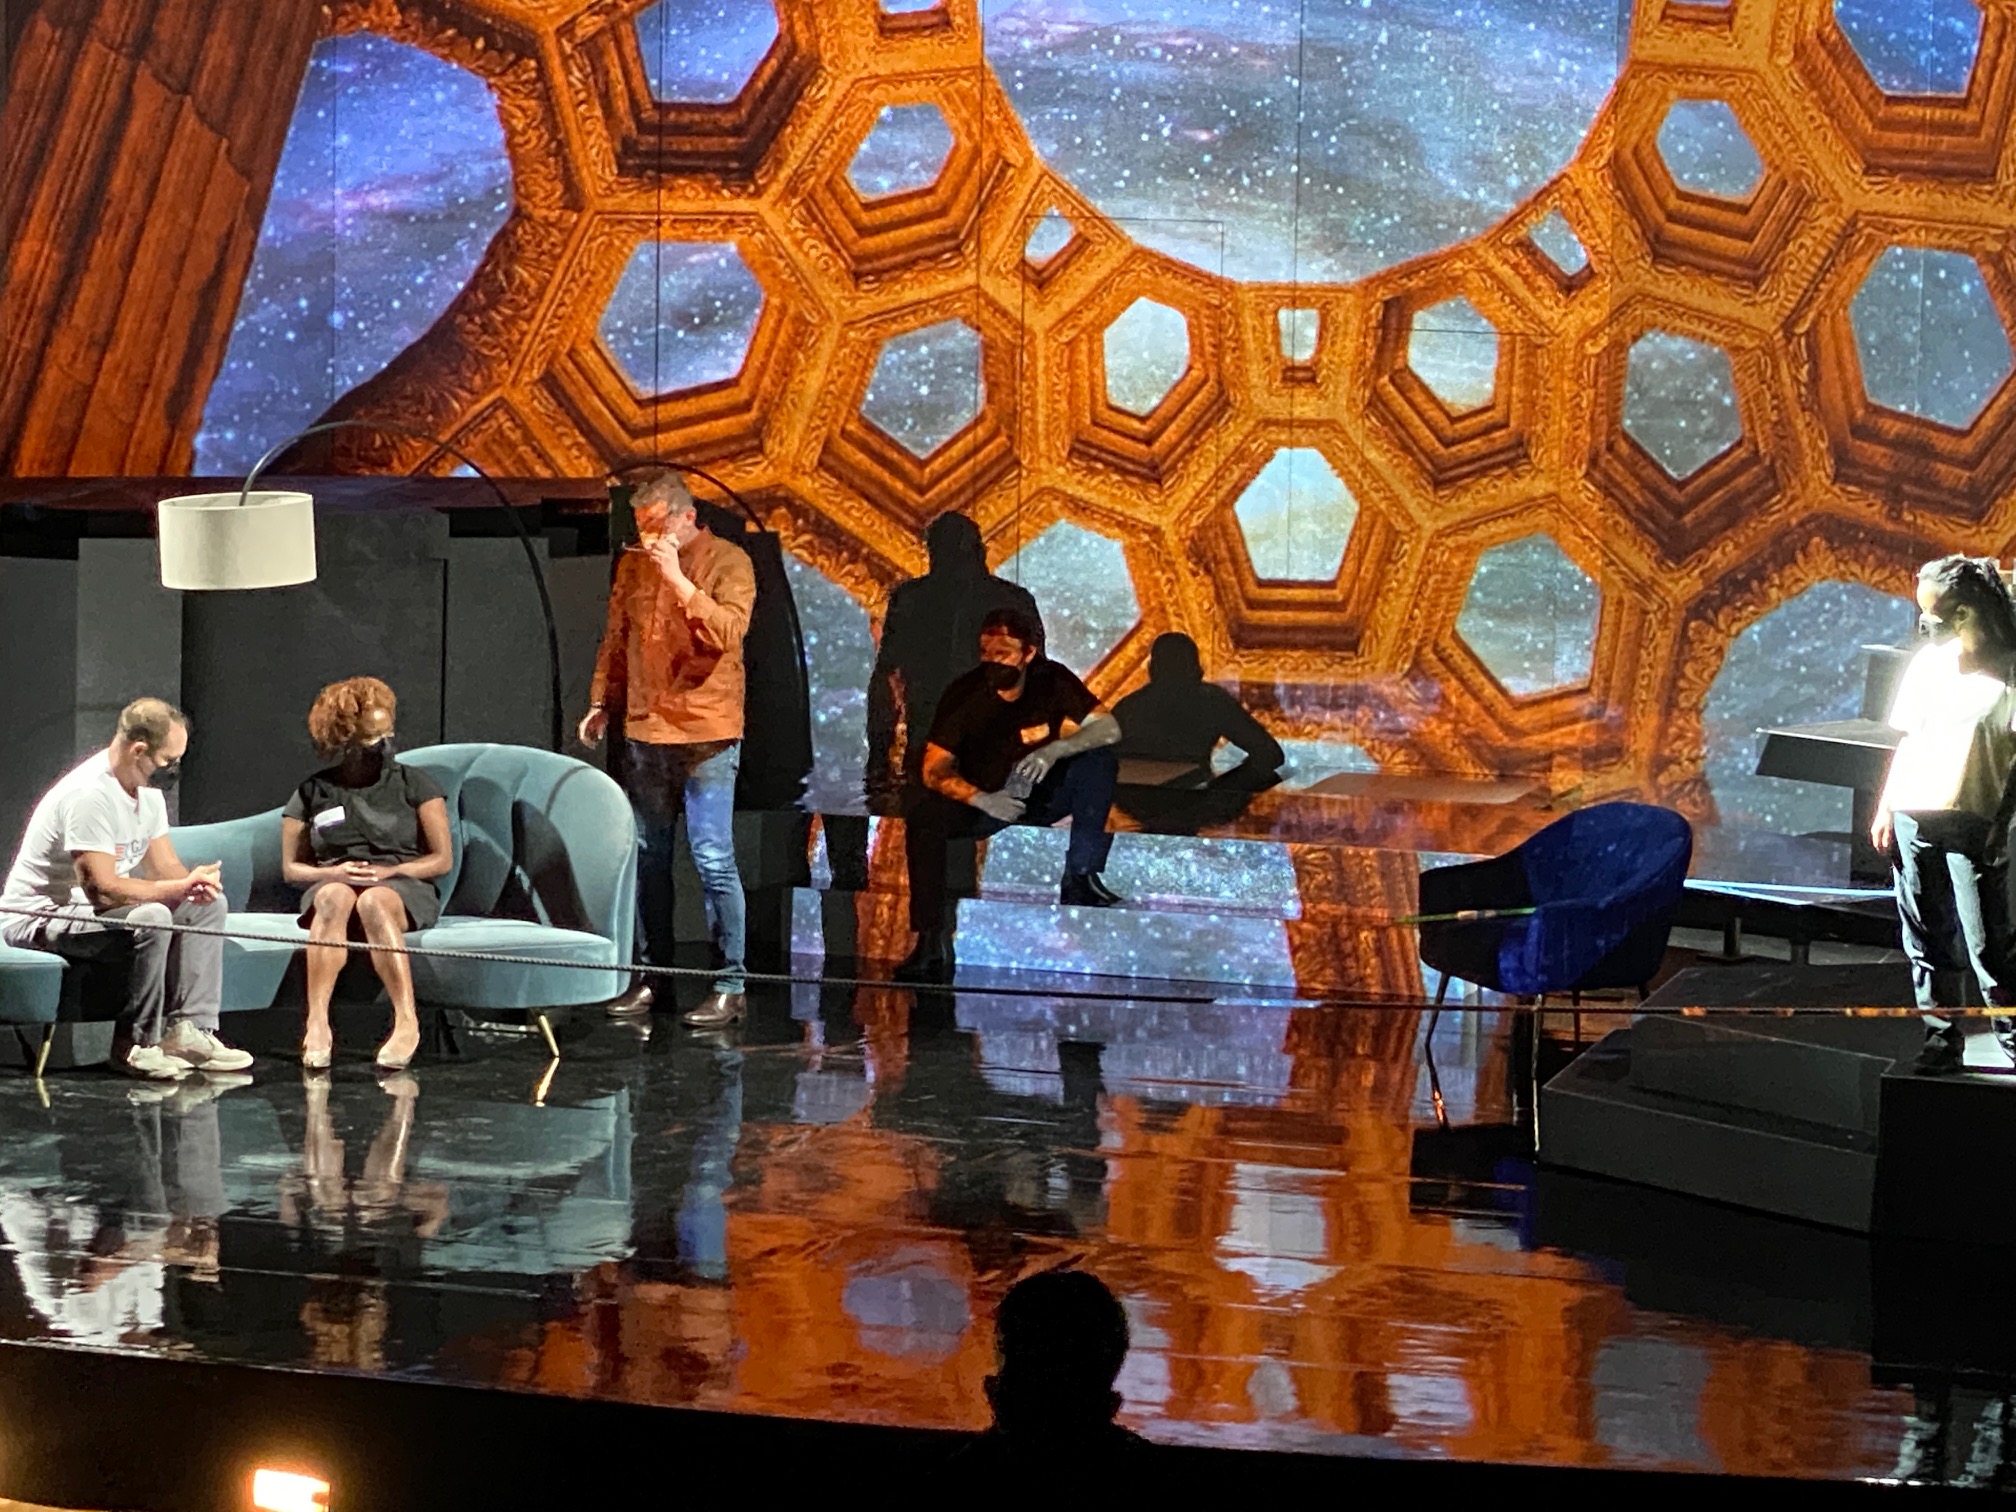 VFX takes ‘Cosmic Cowboy’ opera out of this world Lesley University